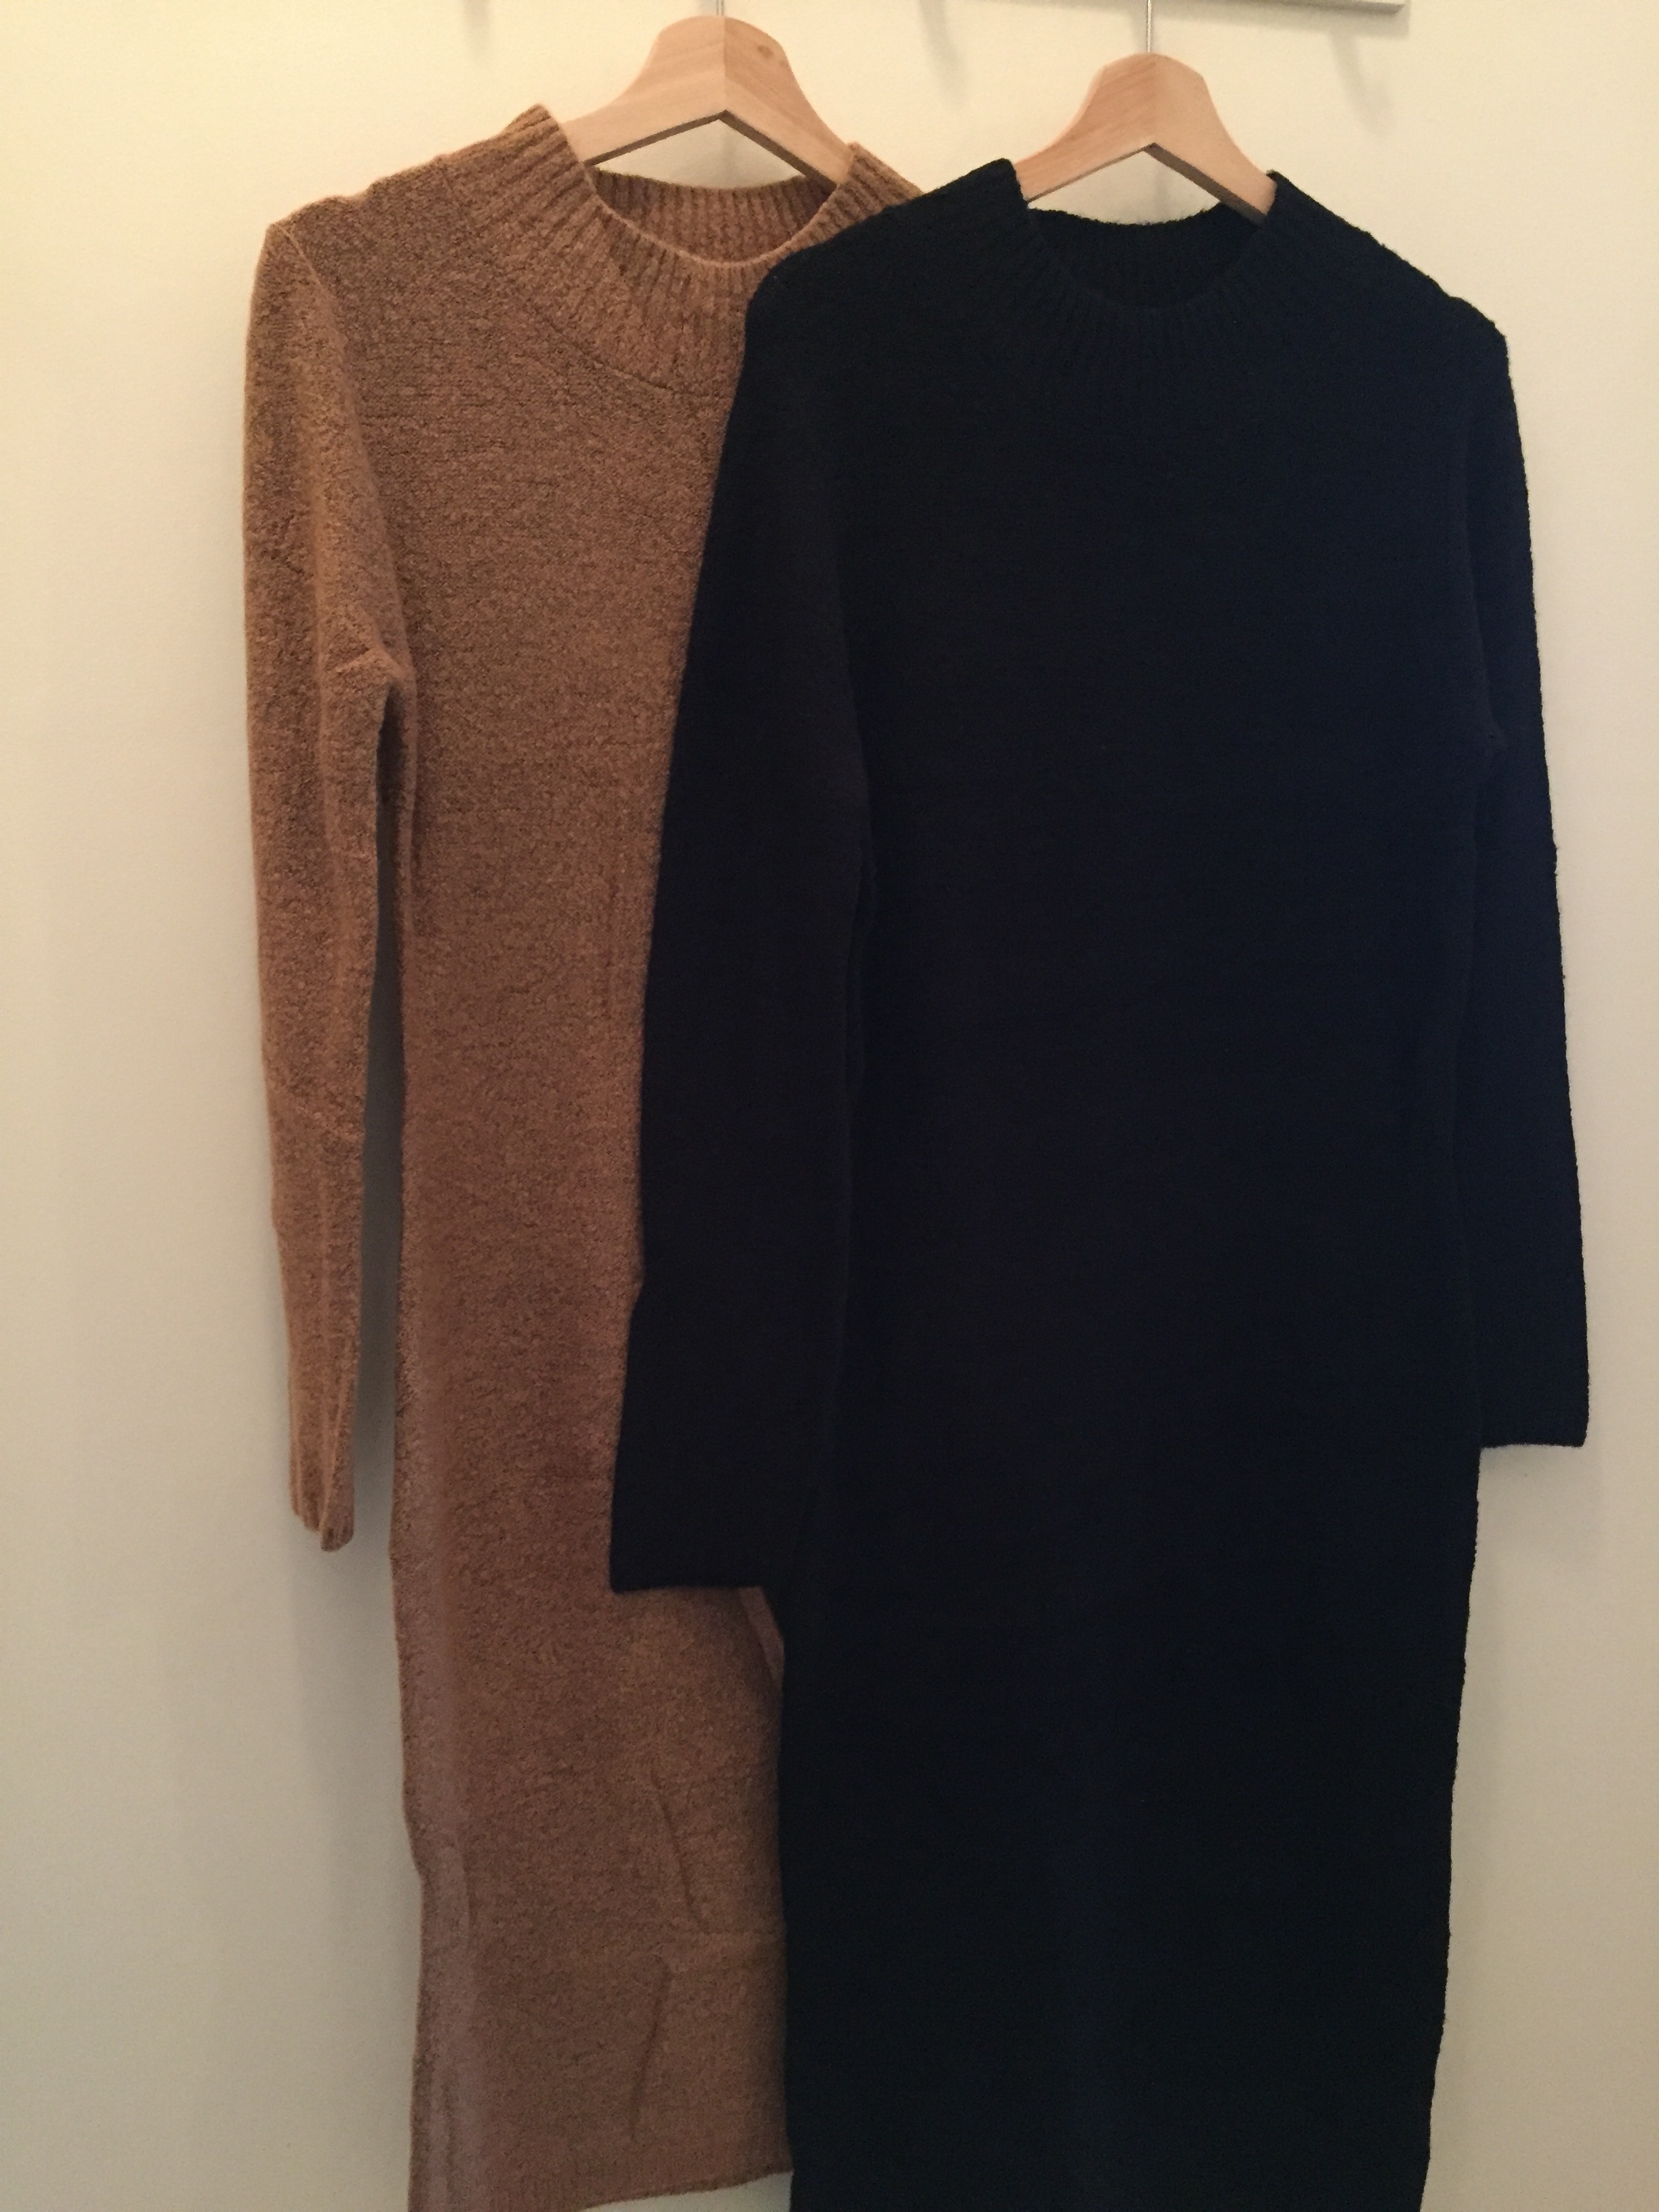 Mock Neck Sweater Dress ($42 Red, Camel, and Black)